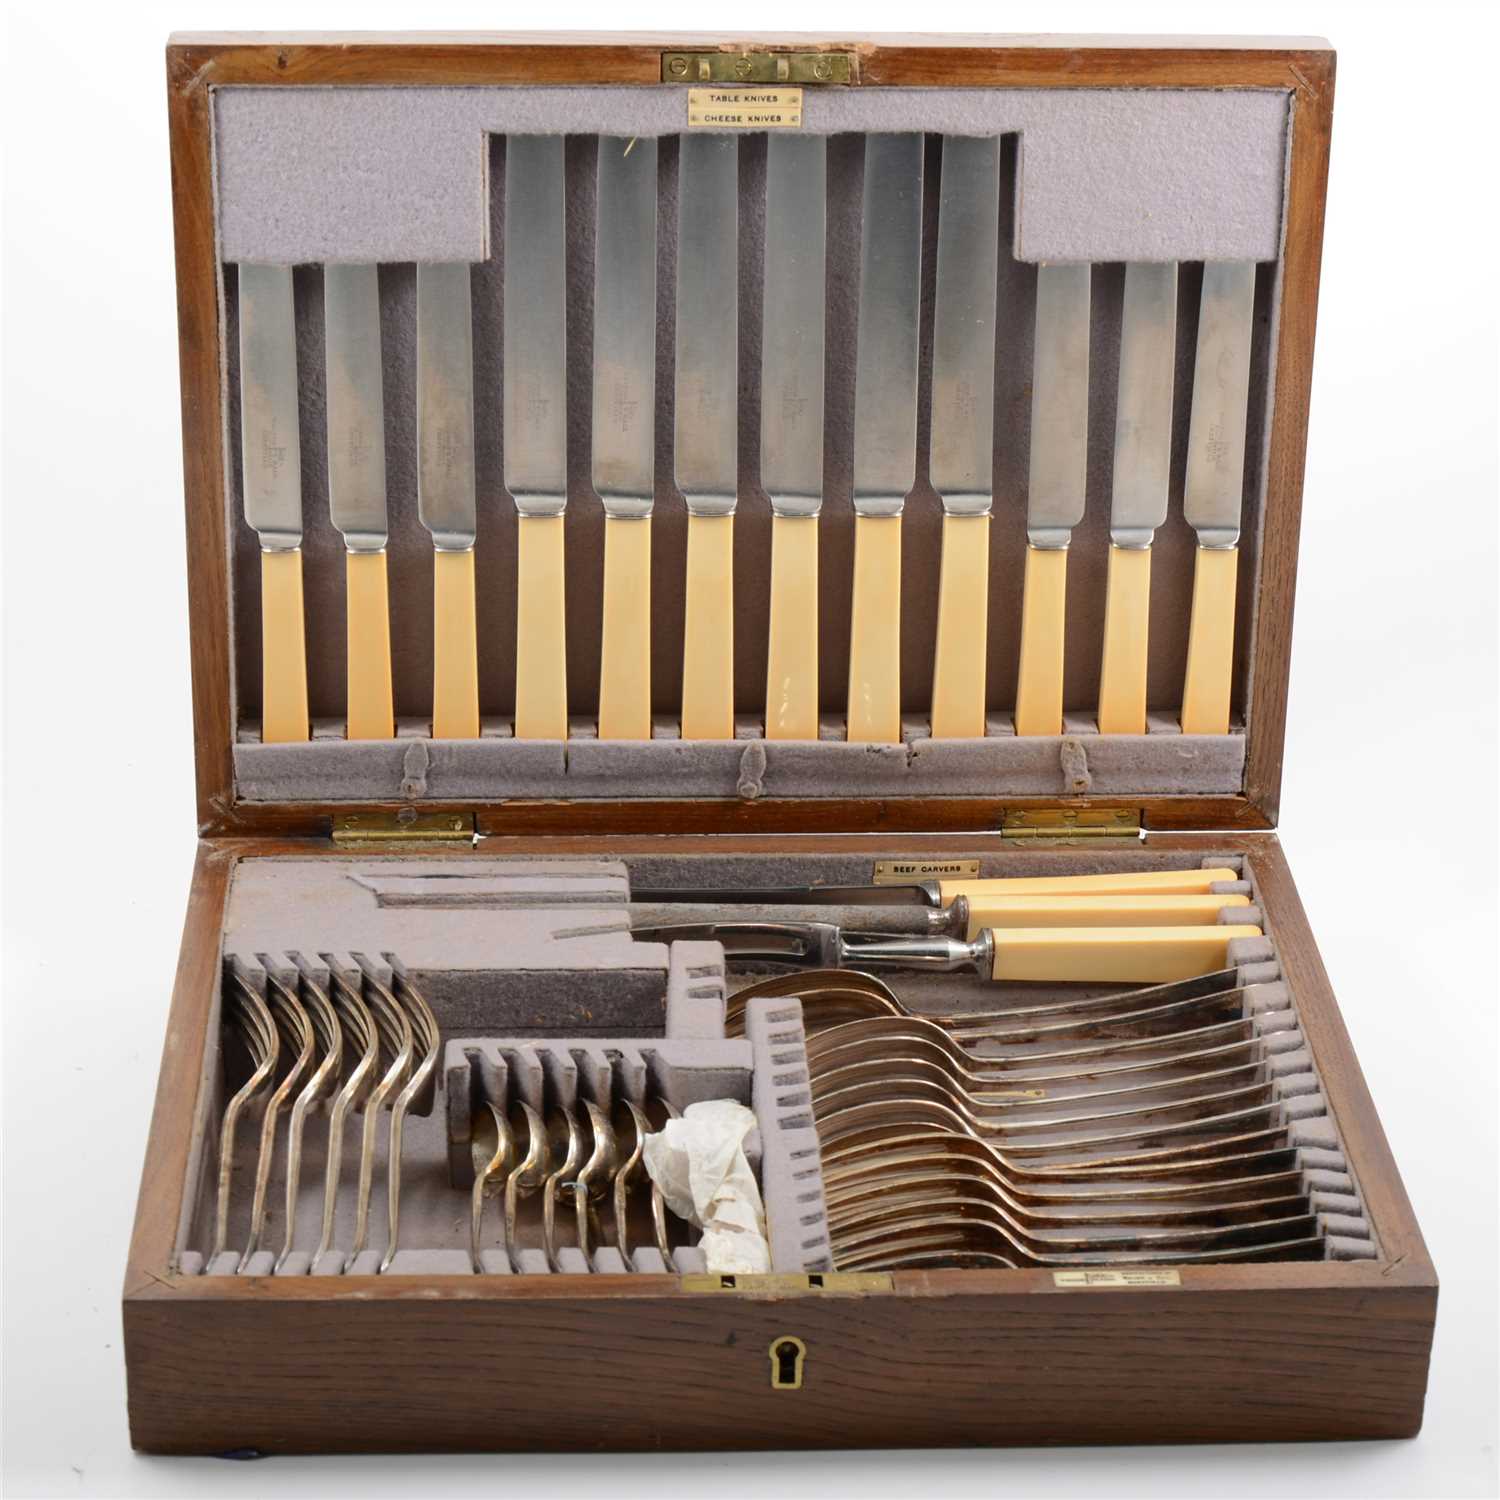 Lot 79 - A Walker & Hall silver-plated canteen of cutlery, 6 place settings, in oak case with vacant presentation plaque.